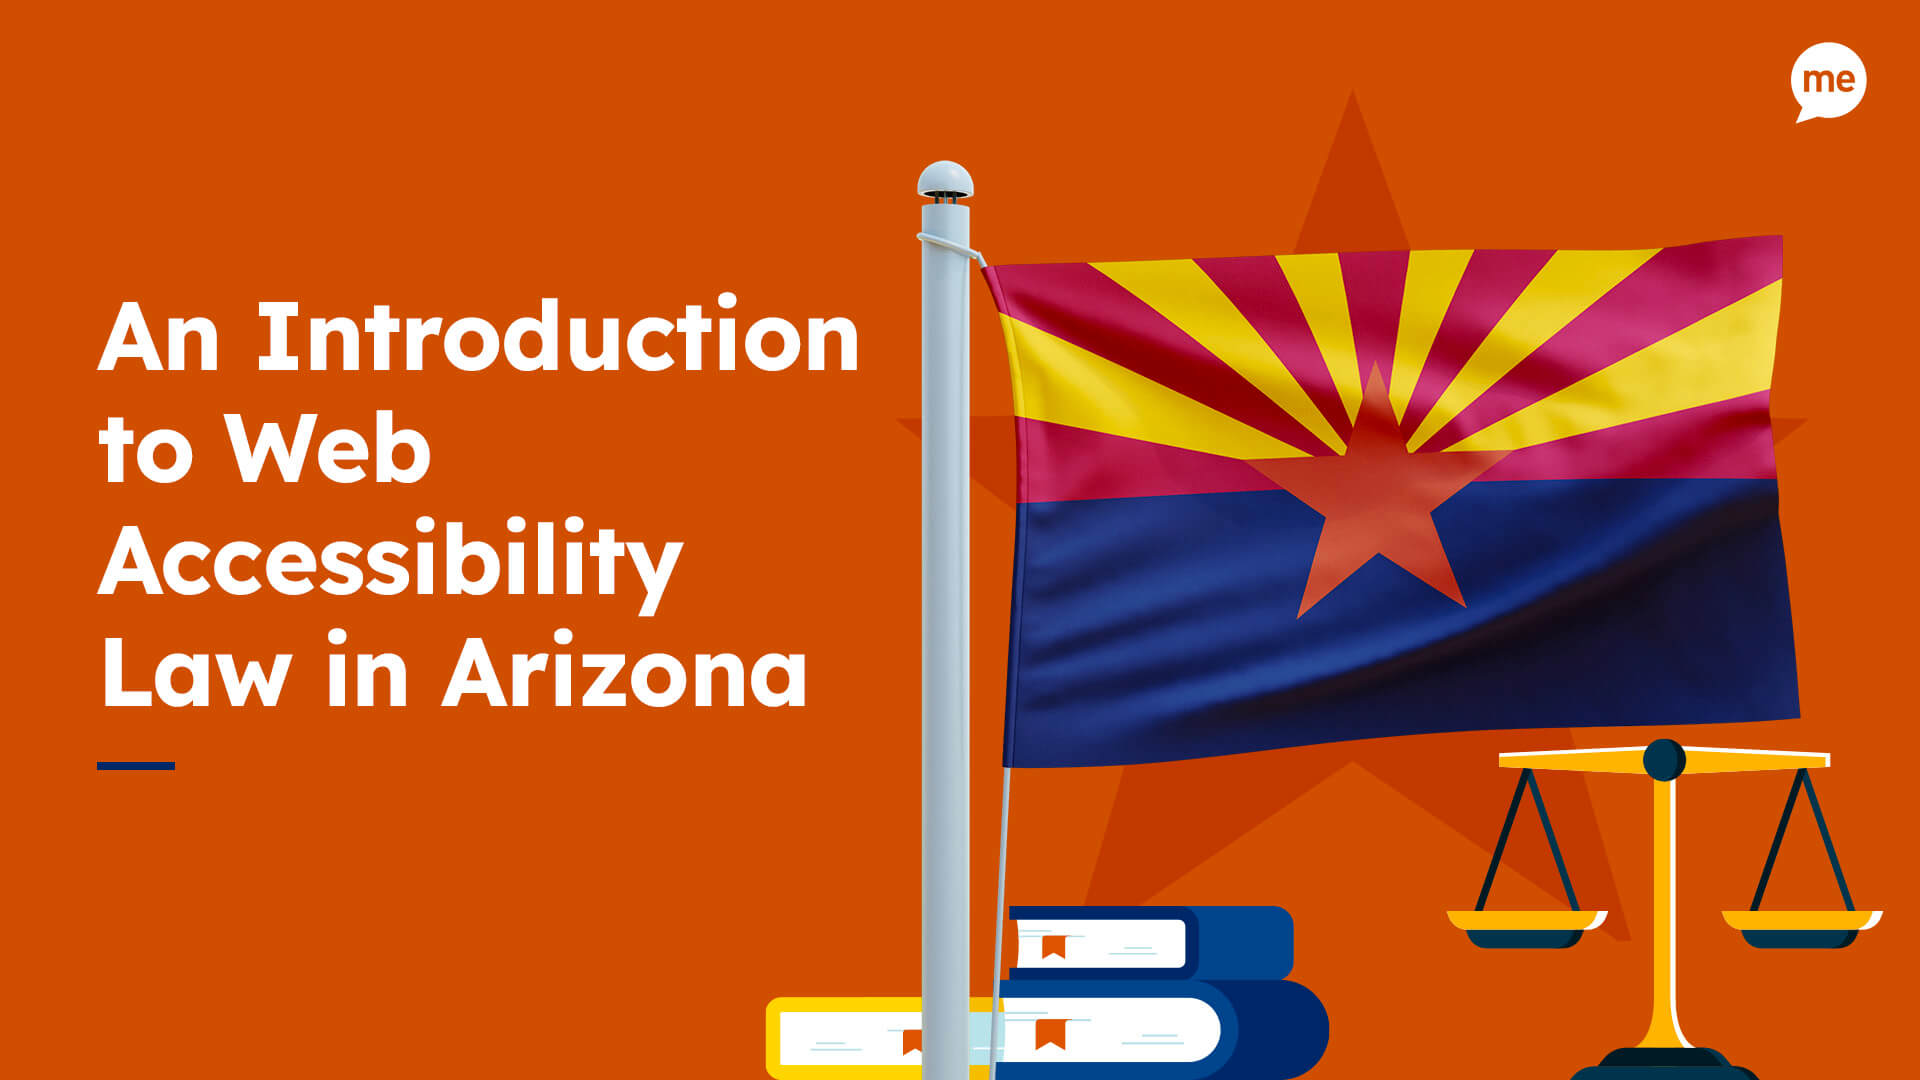 An Introduction to Web Accessibility Law in Arizona